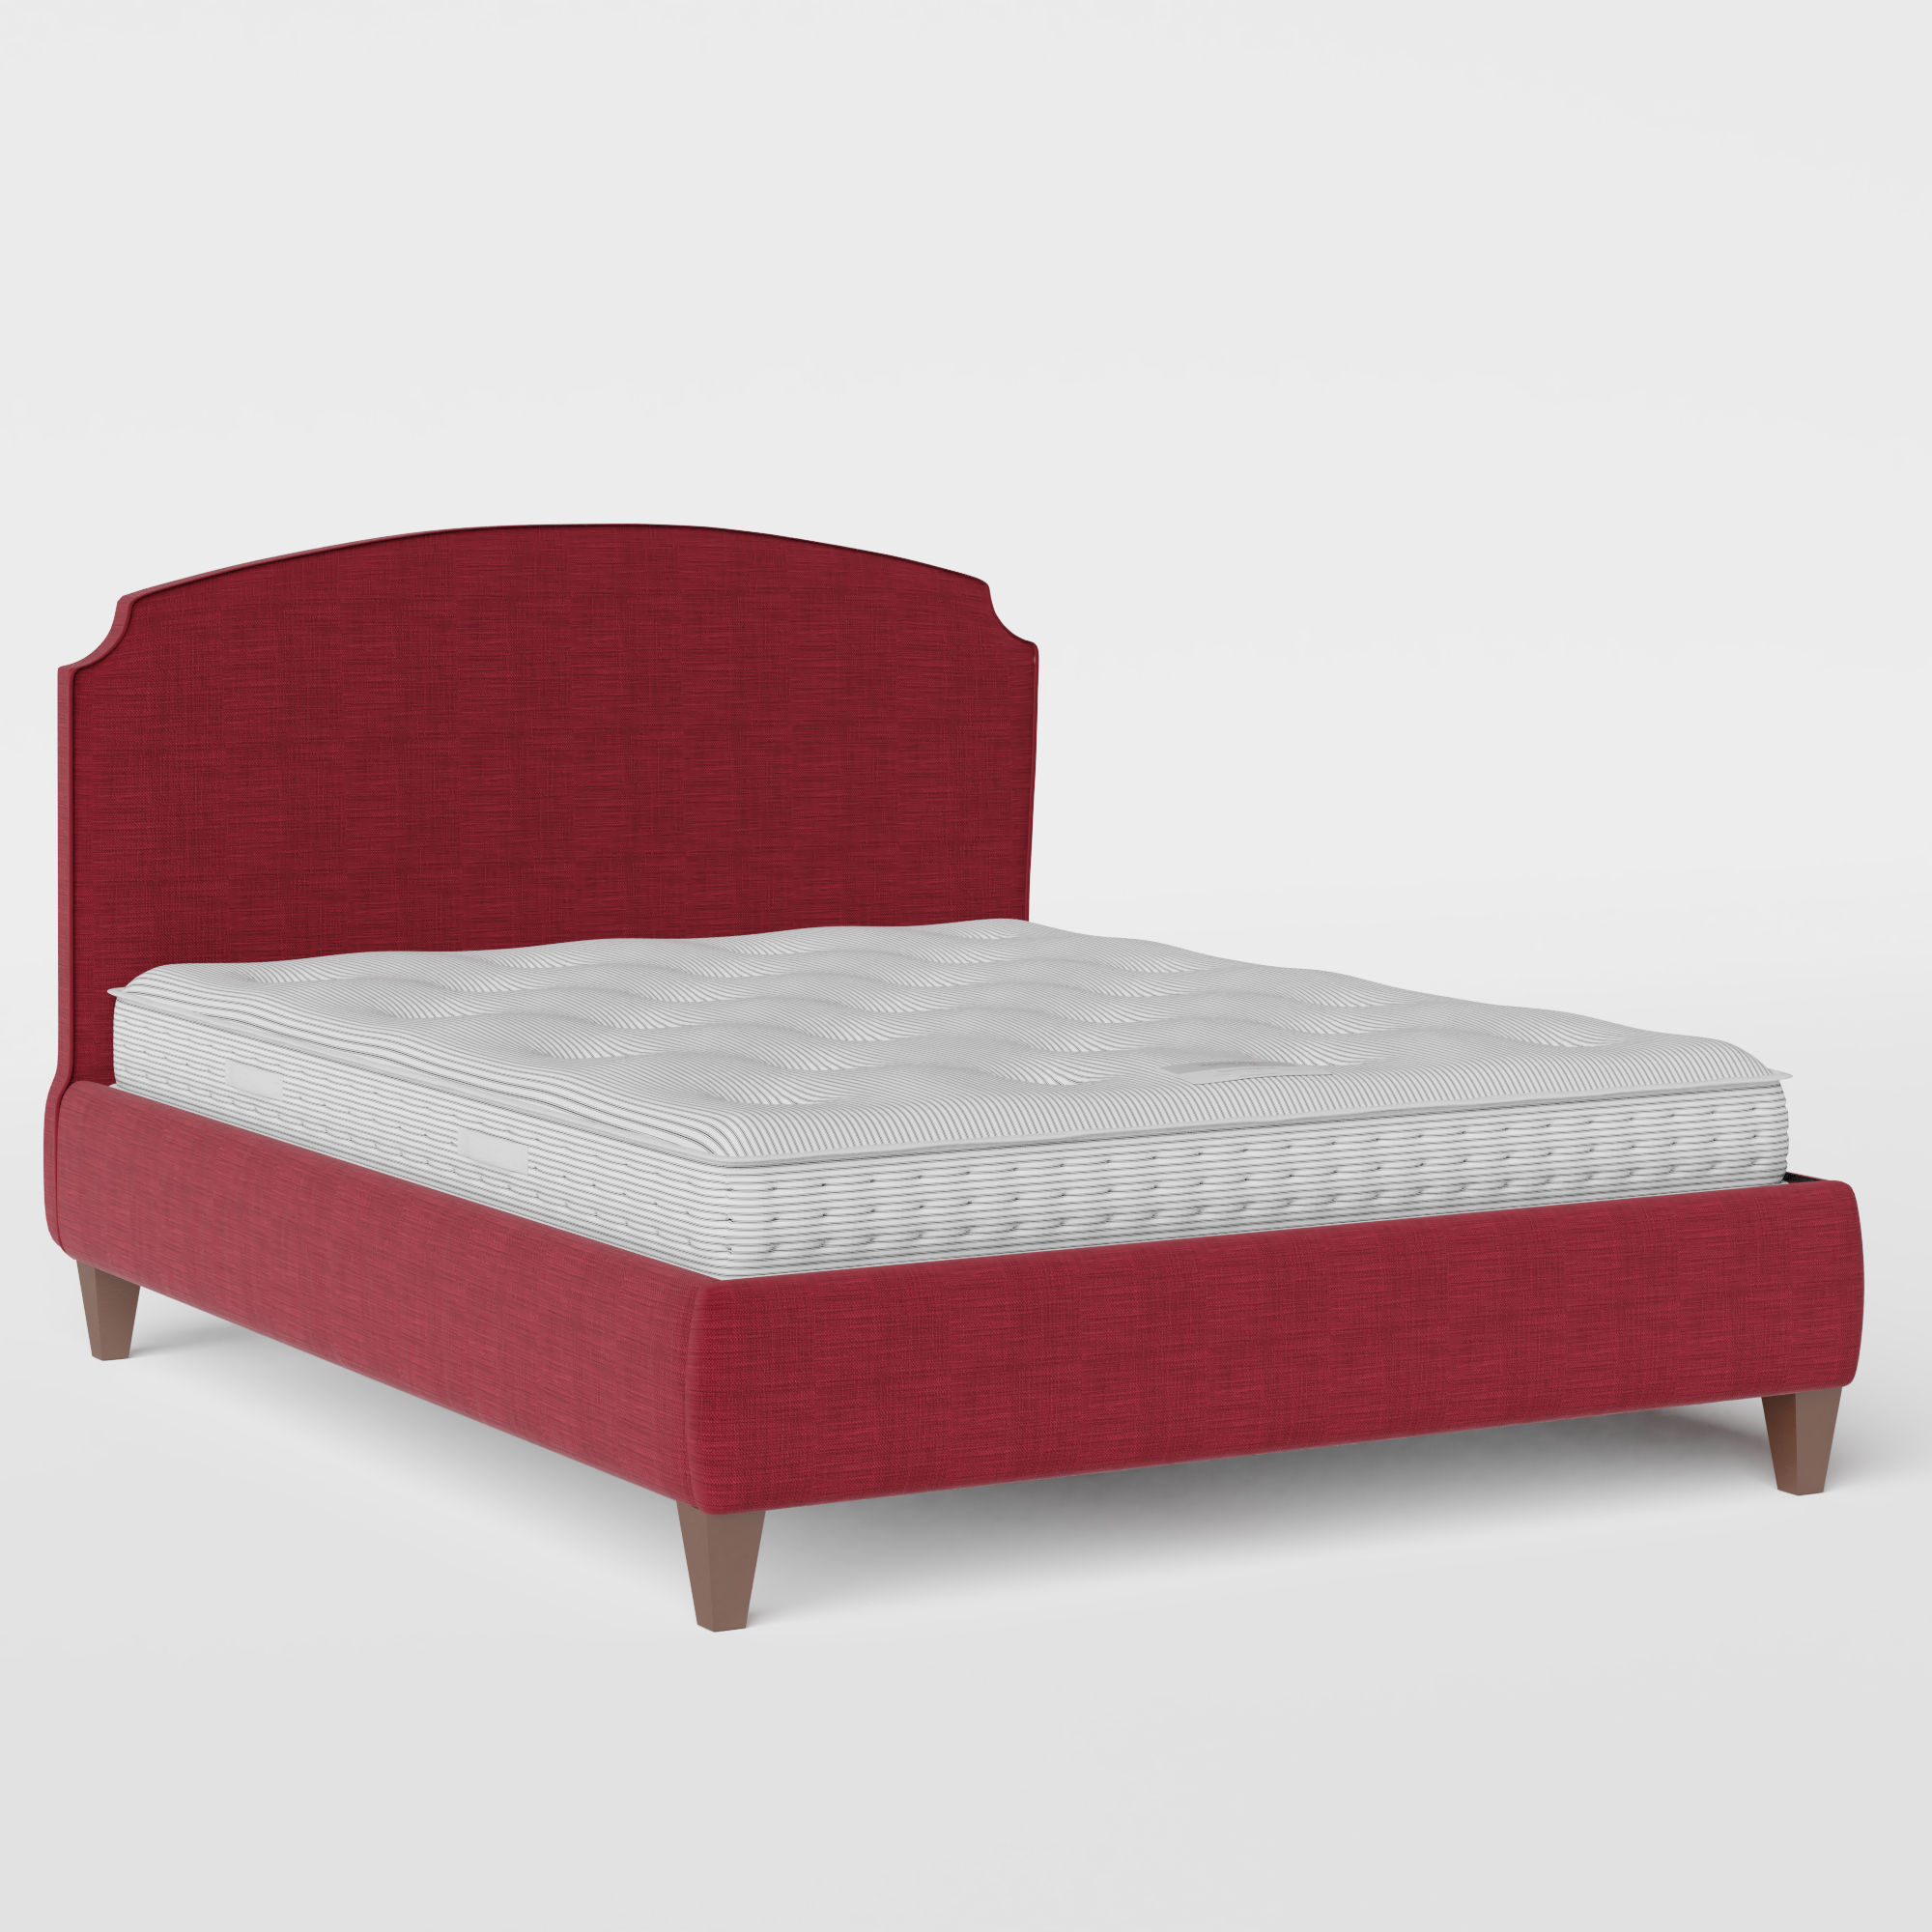 Lide with Piping stoffen bed in cherry